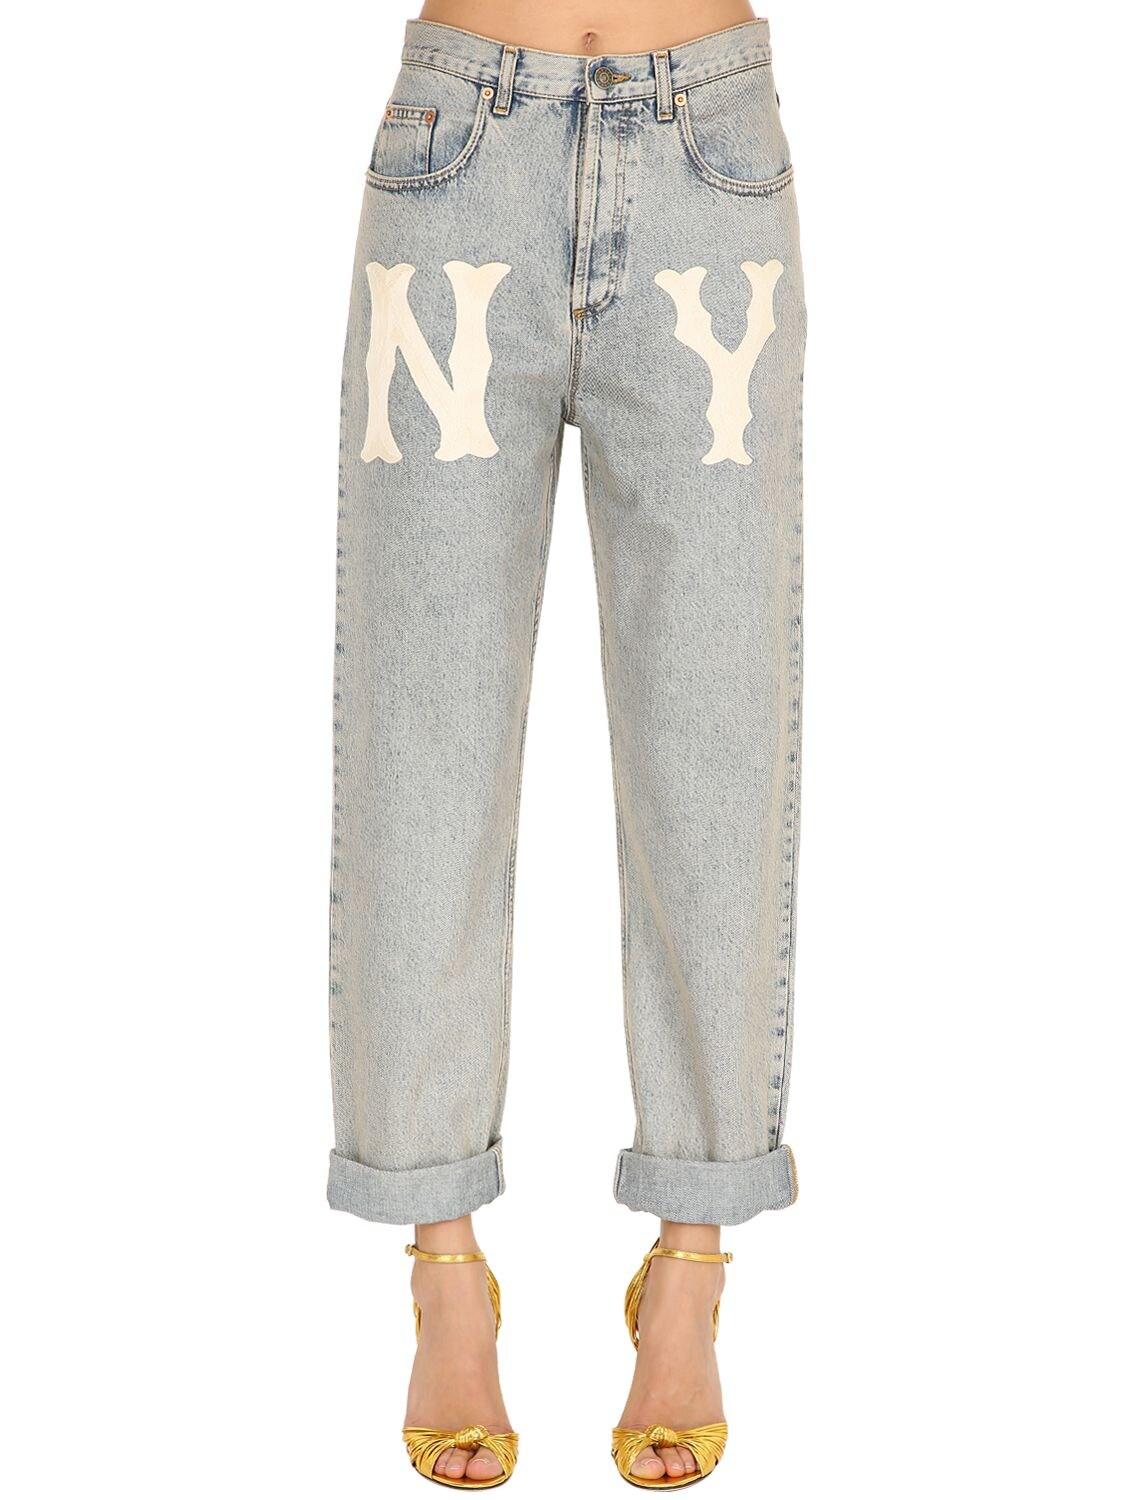 Gucci Washed Denim Jeans W/ Ny Patch in Light Blue (Blue) | Lyst